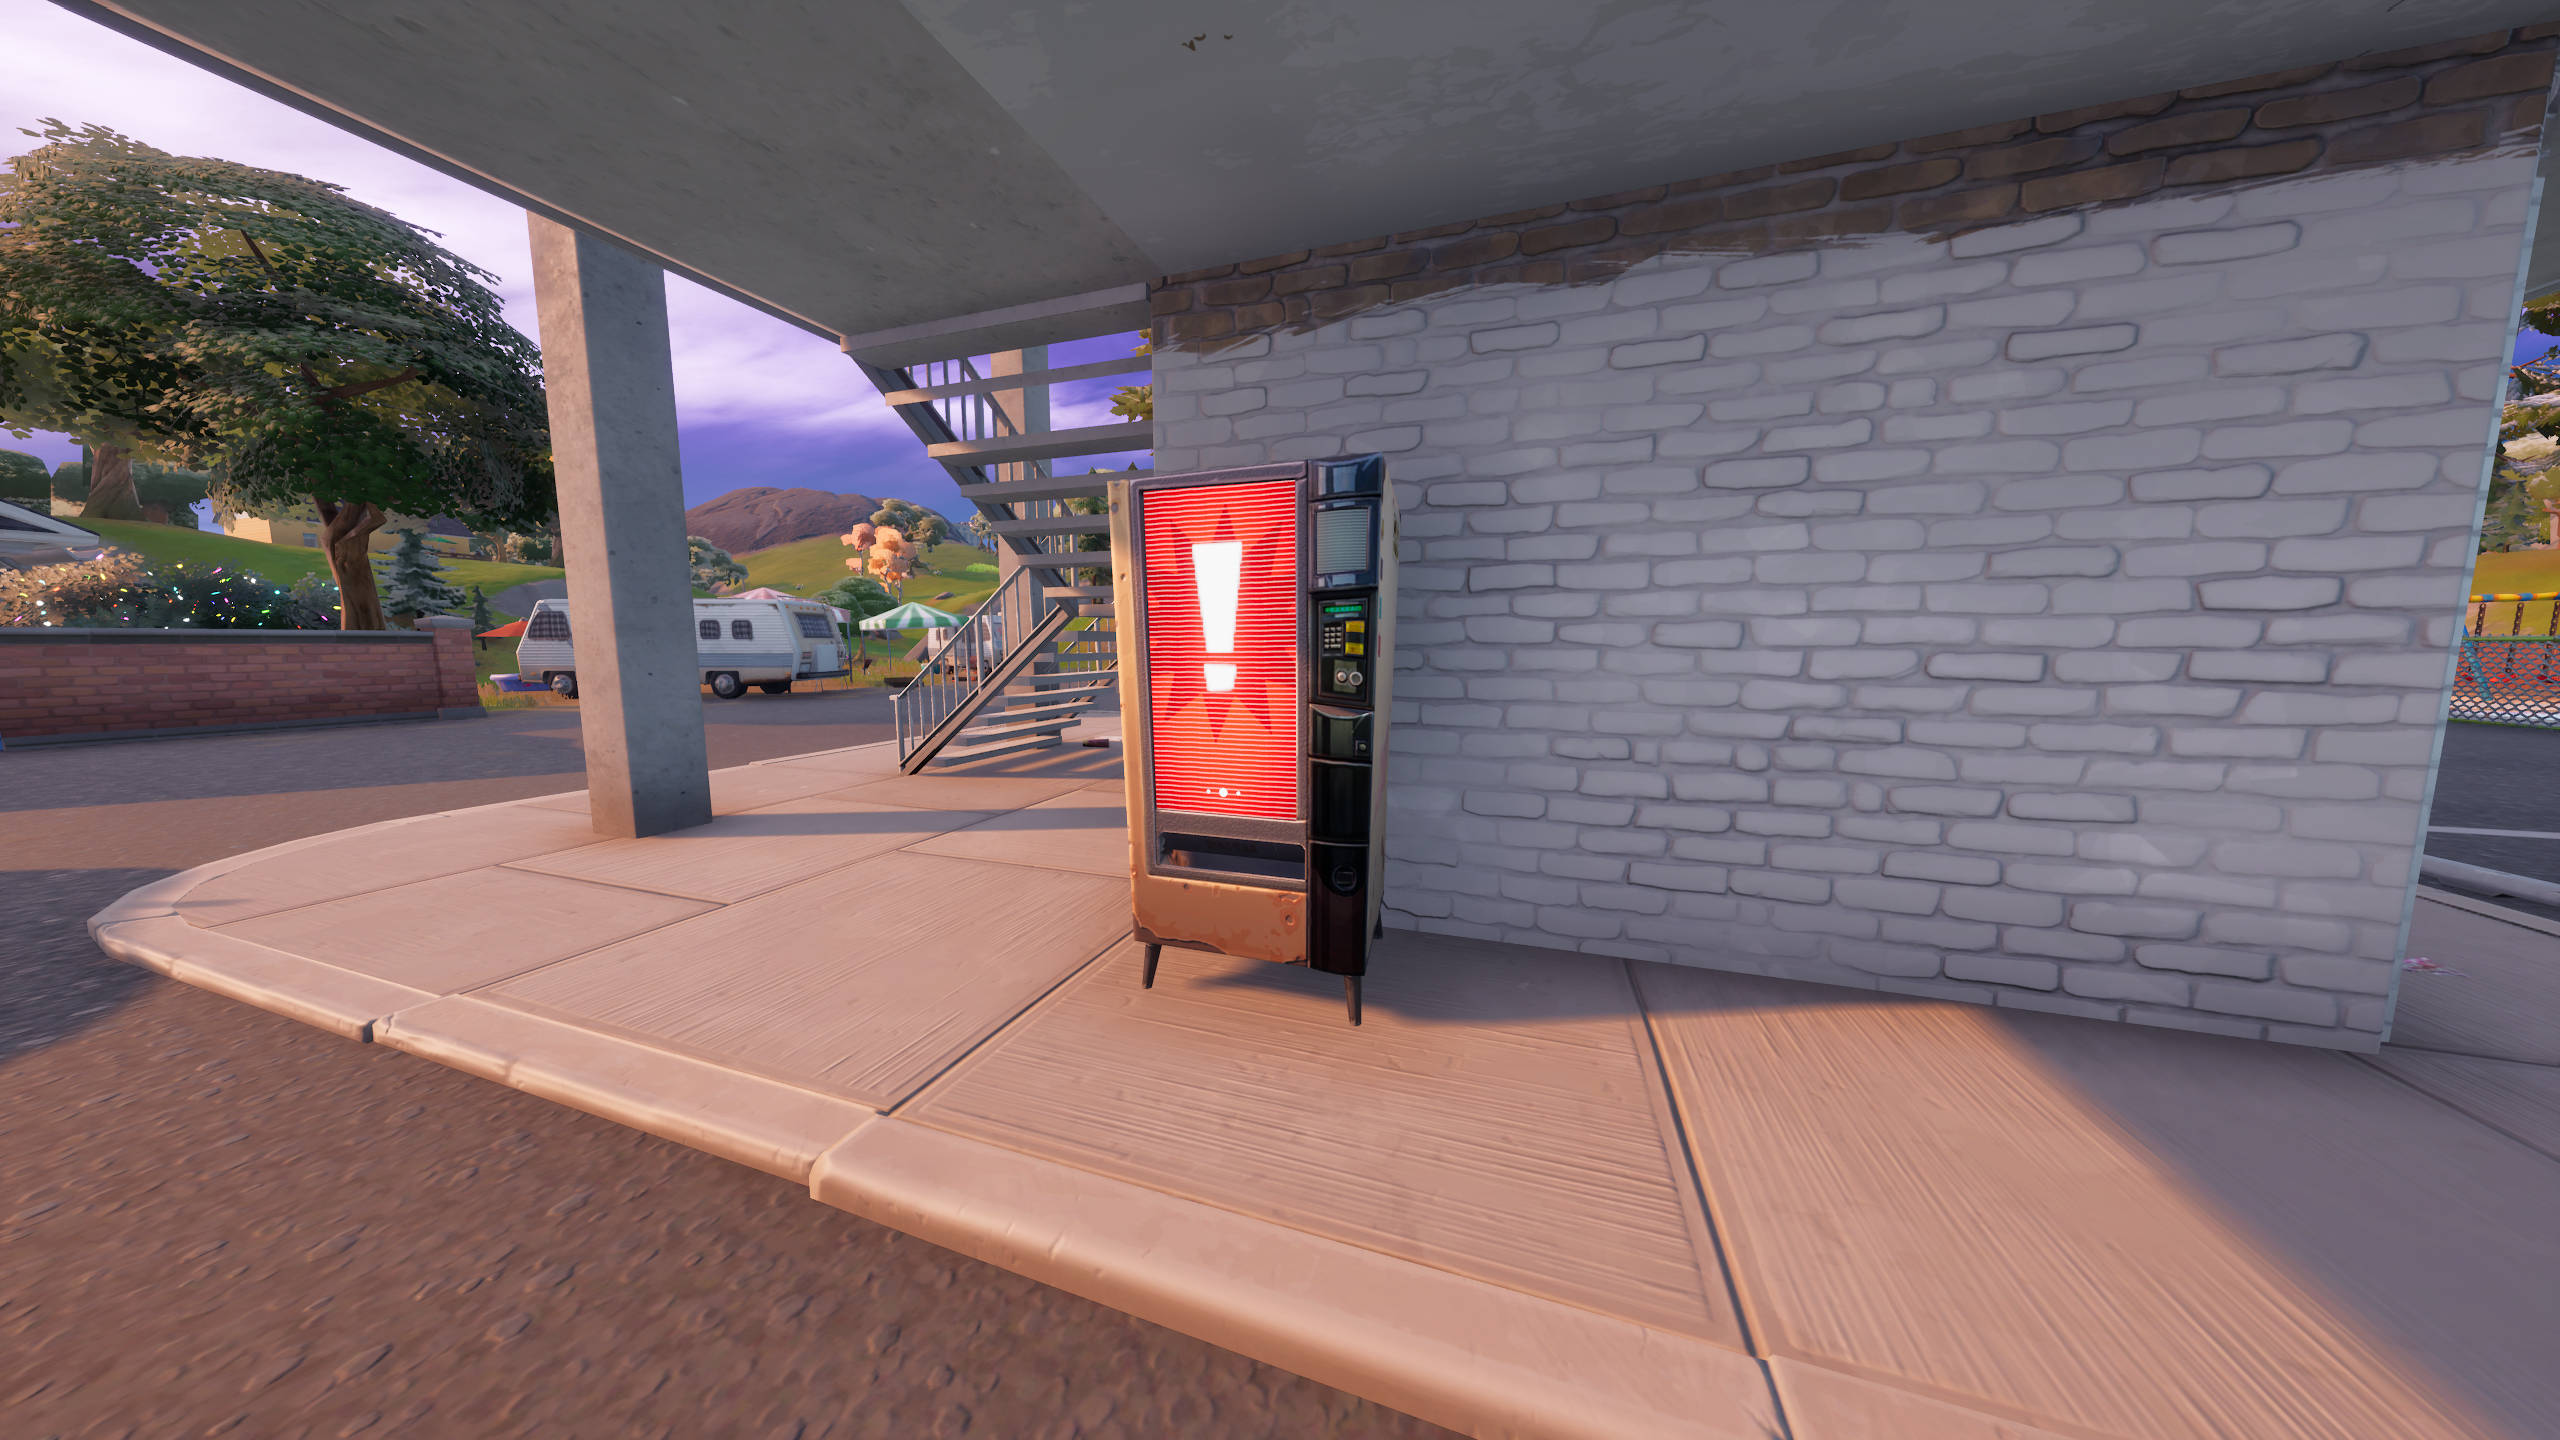 How to purchase items from malfunctioning vending machines in Fortnite